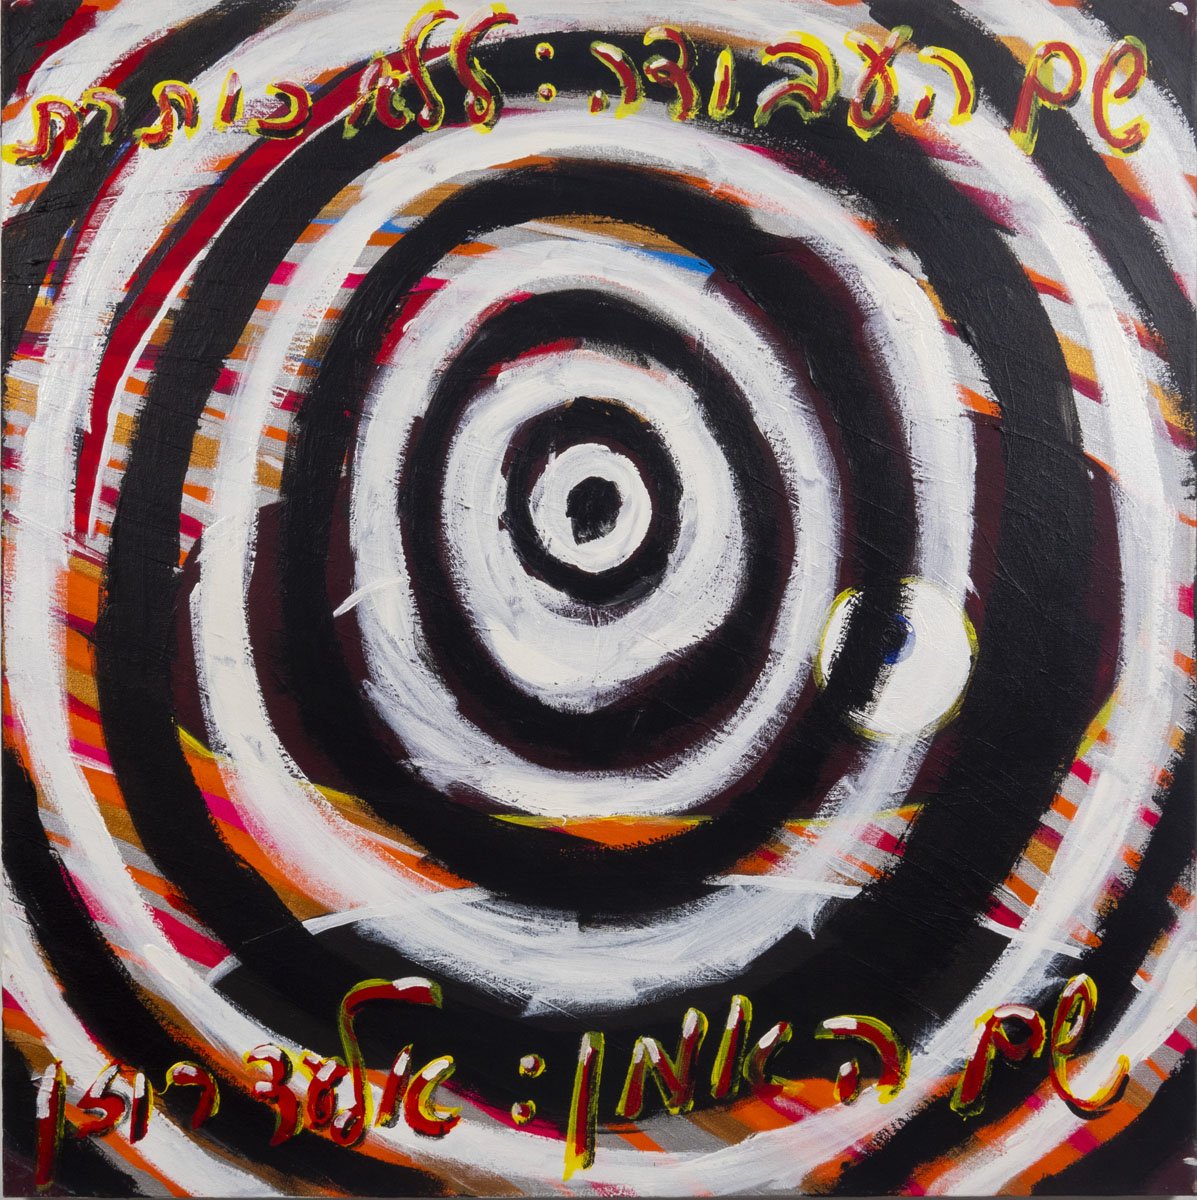 Name of the work, name of the artist, 2021, acrylic on canvas, 100x100 cm